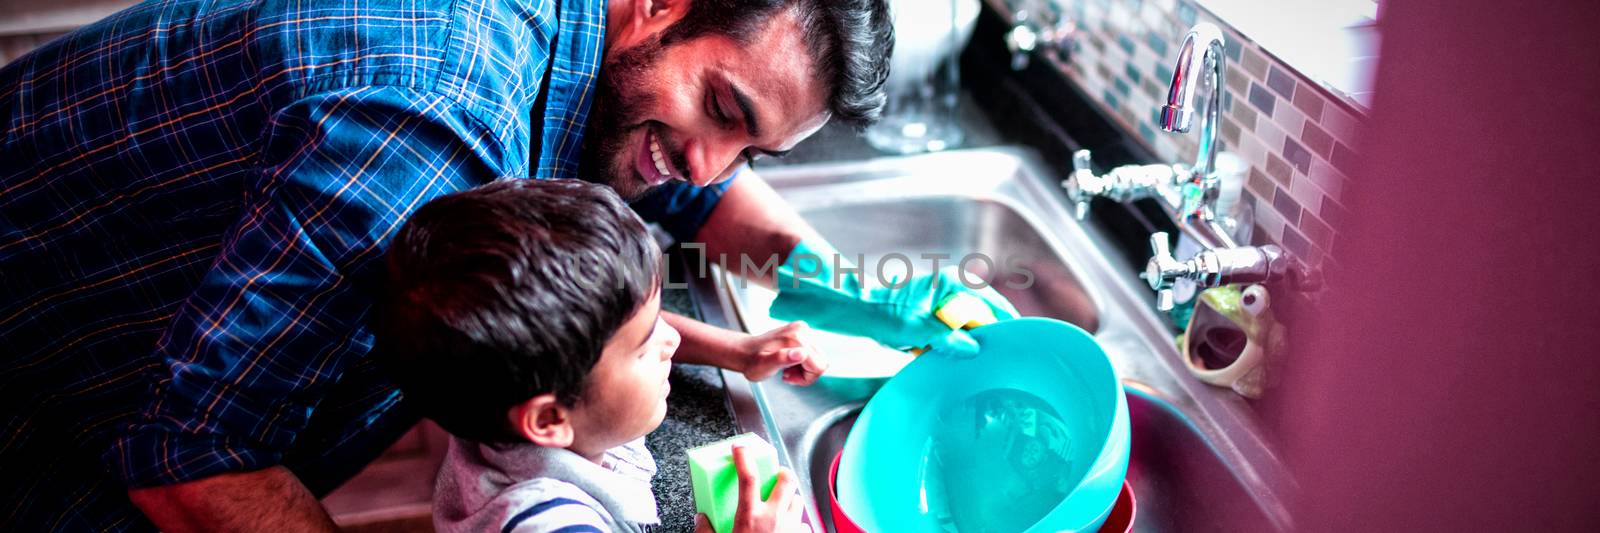 Father and son cleaning utensils at home by Wavebreakmedia